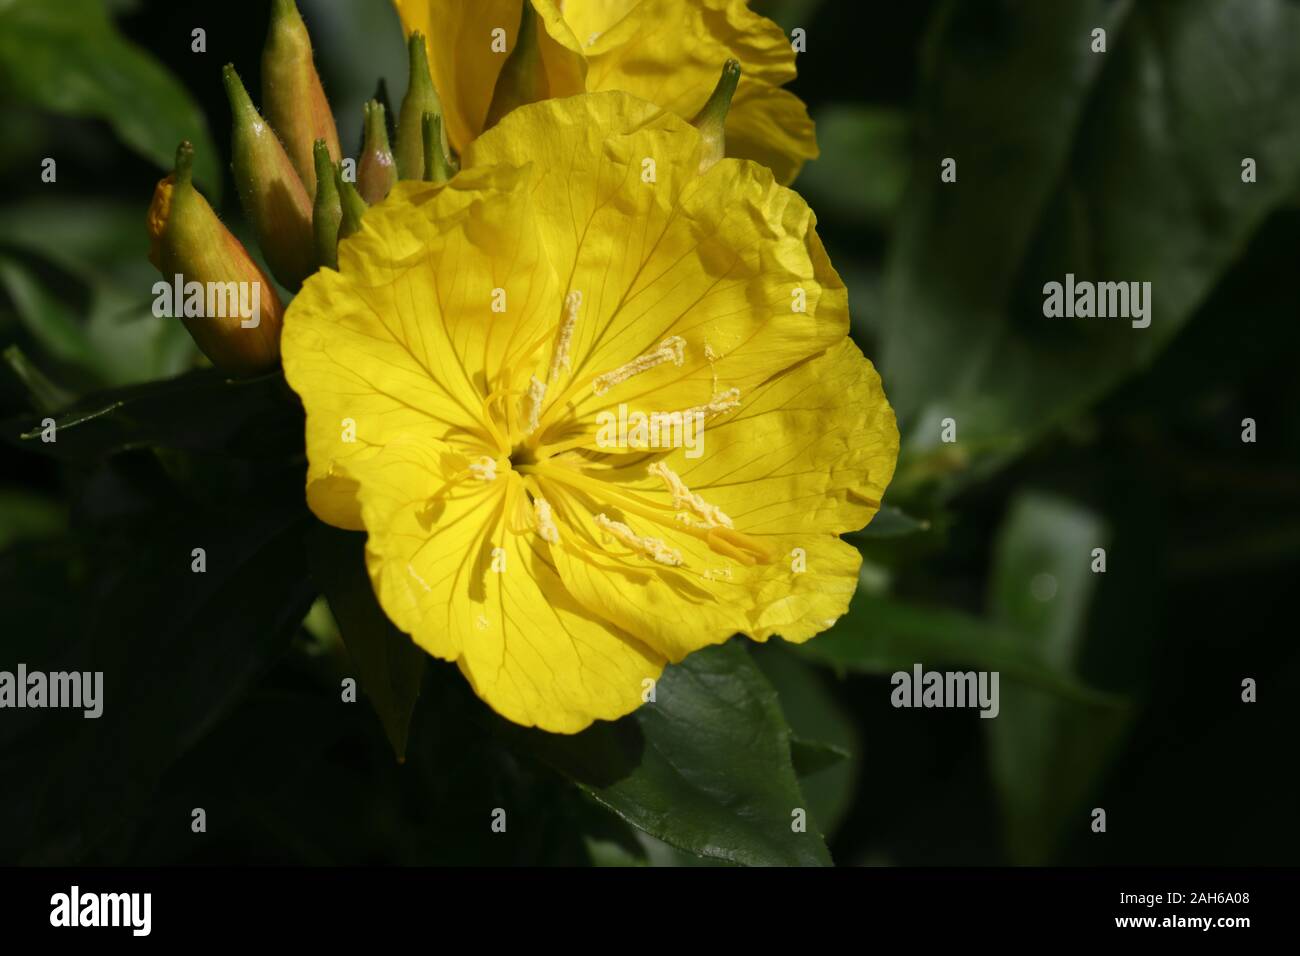 Oenothera fruticosa, the narrowleaf evening primrose or narrow-leaved sundrops, is a species of flowering plant in the evening primrose family. Stock Photo